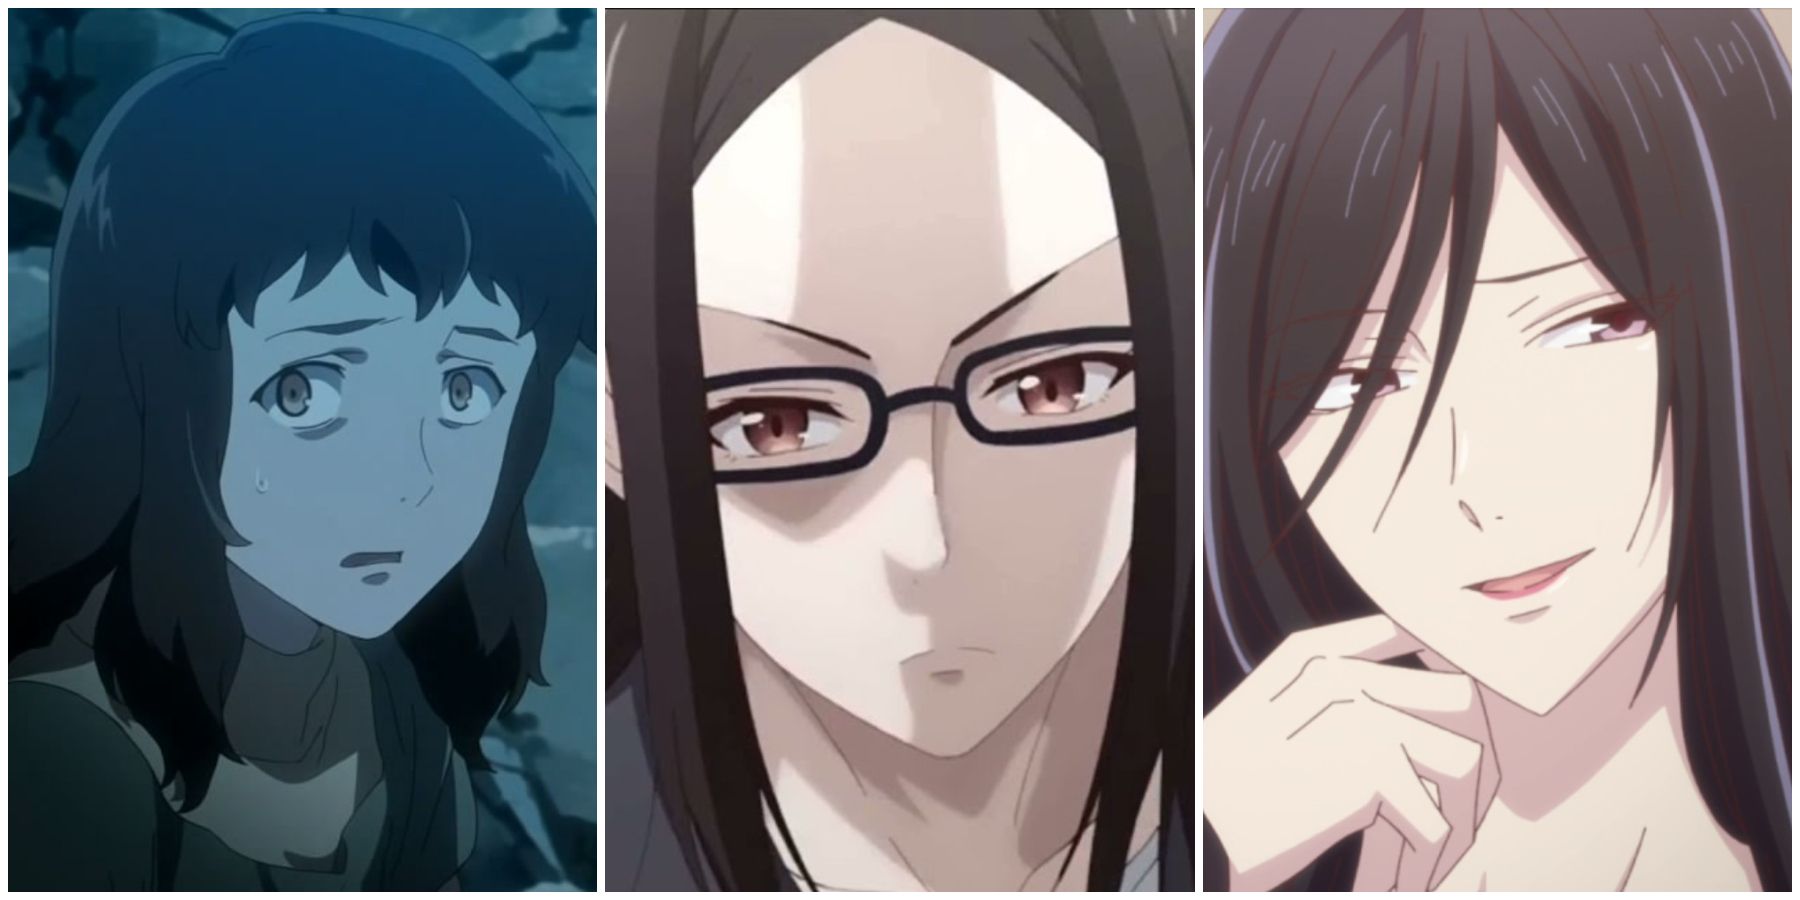 Erased Anime Ending Explained Who Was The Real Killer